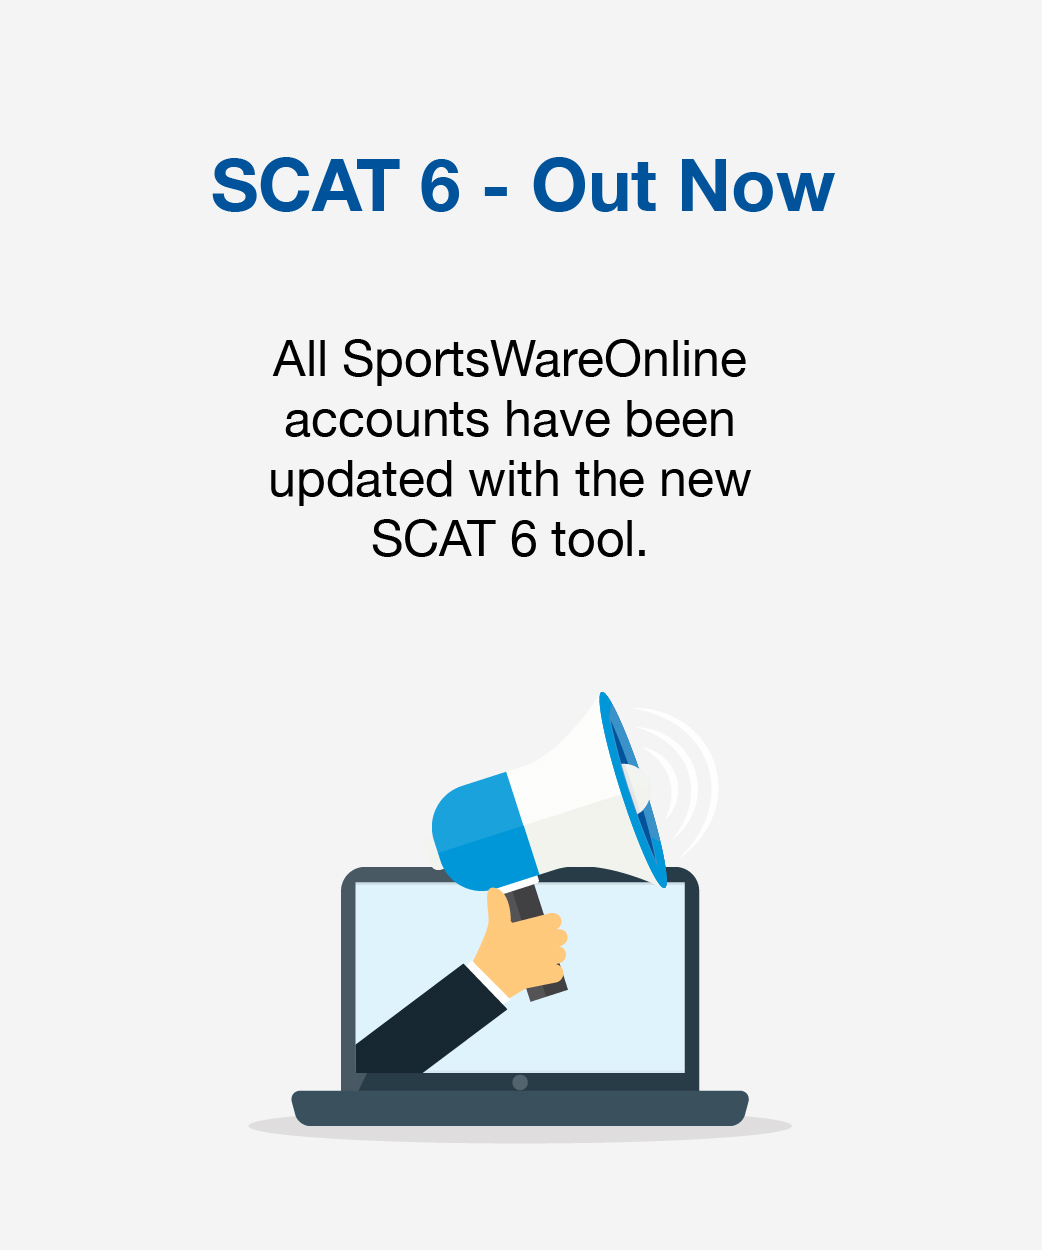 SCAT 6 is now live!